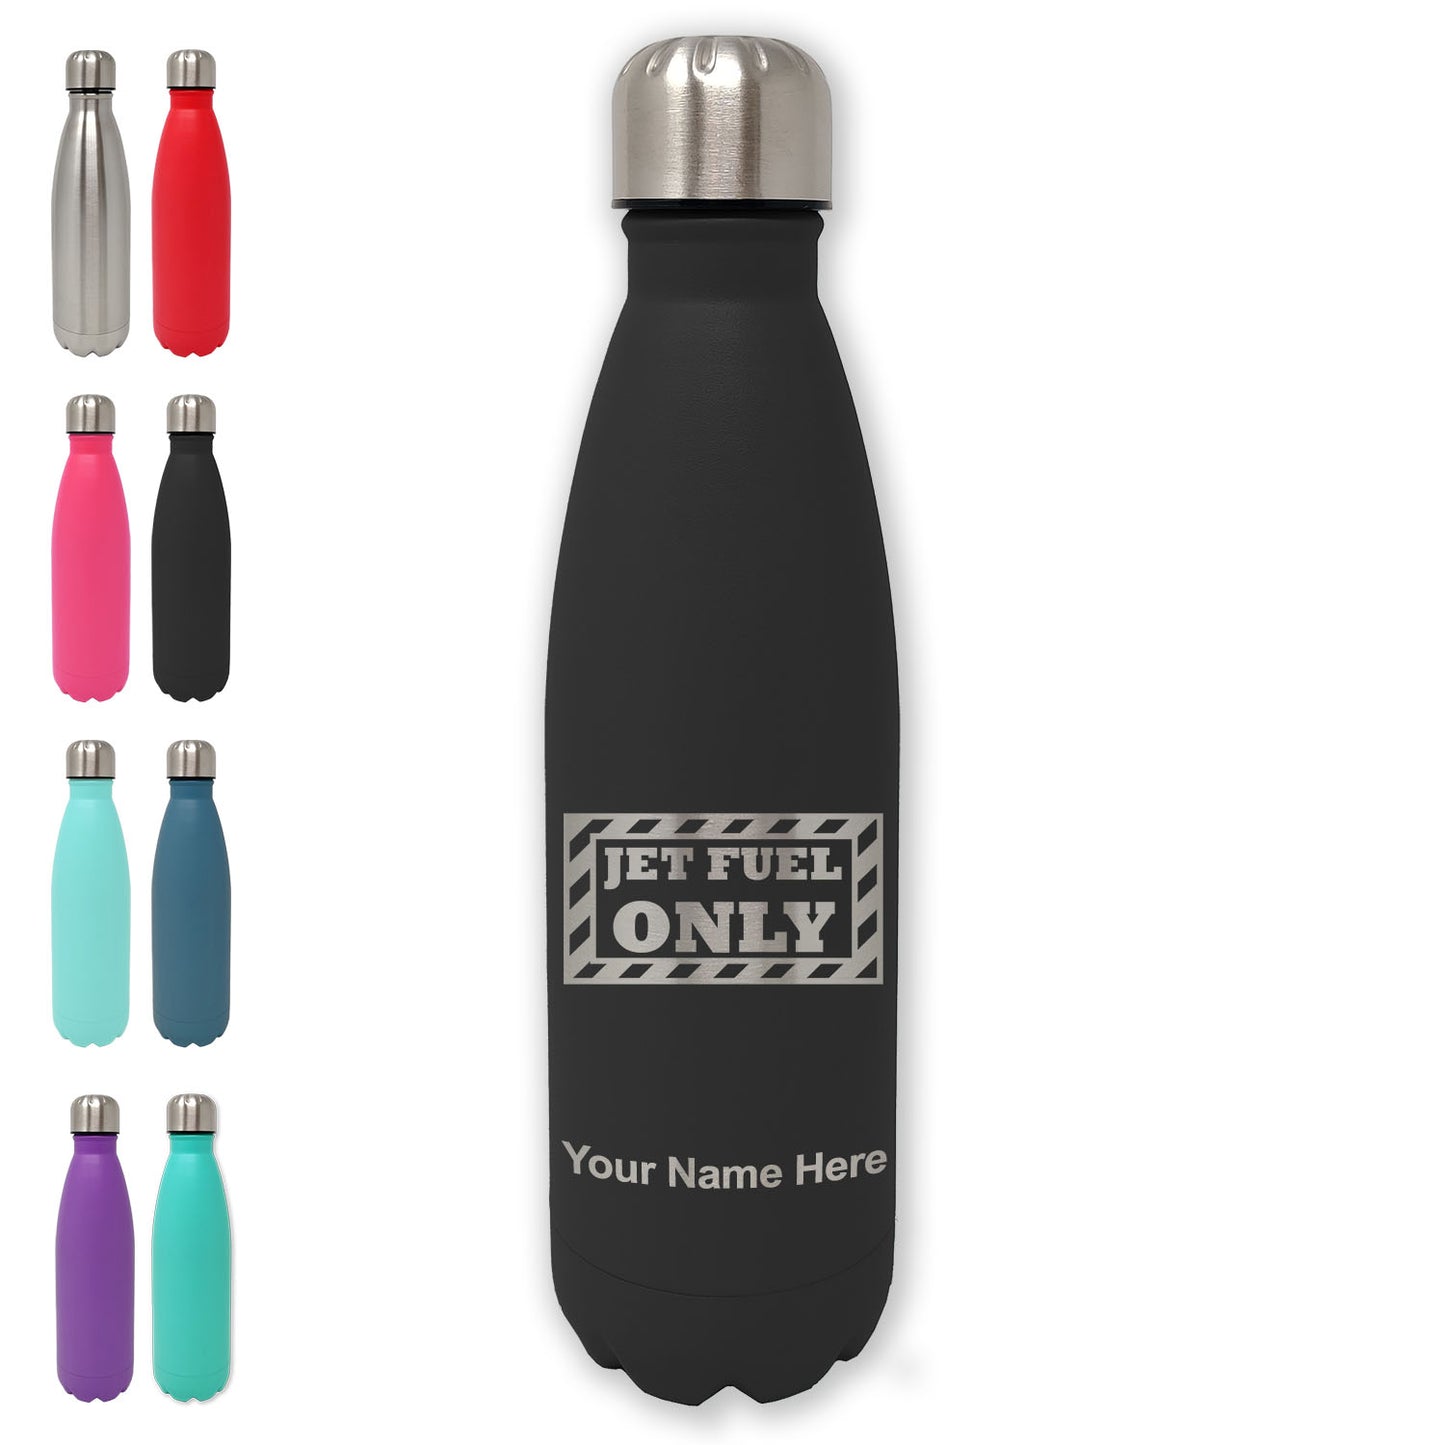 LaserGram Double Wall Water Bottle, Jet Fuel Only, Personalized Engraving Included